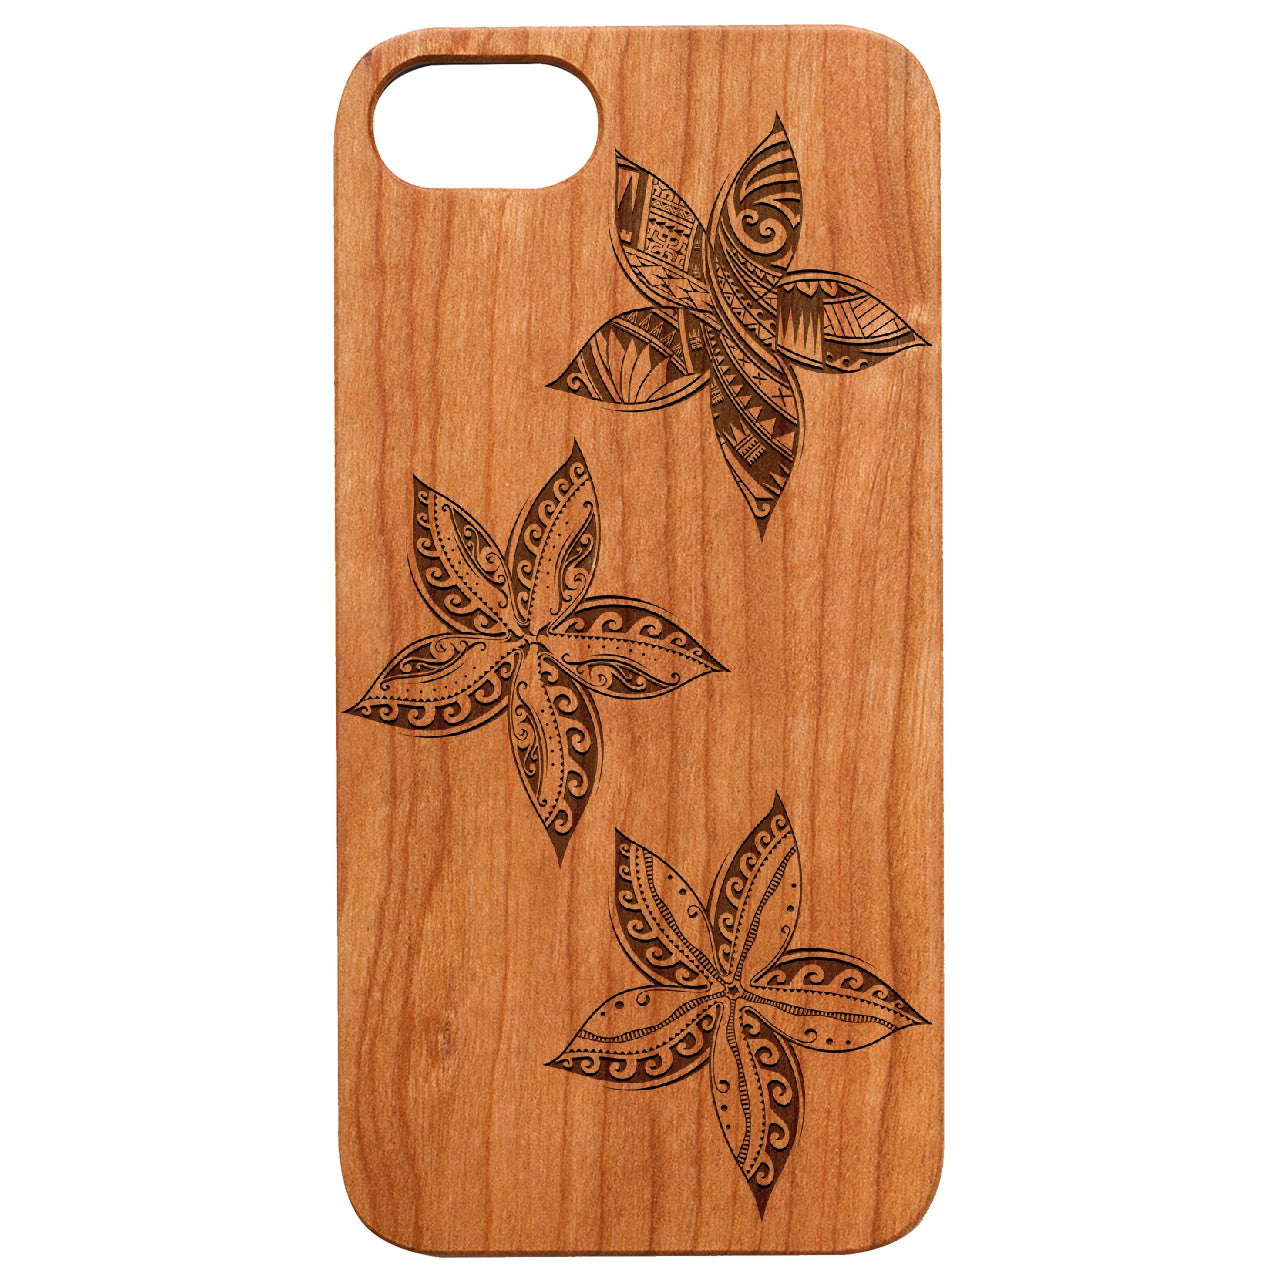  Plumeria - Engraved - Wooden Phone Case - IPhone 13 Models